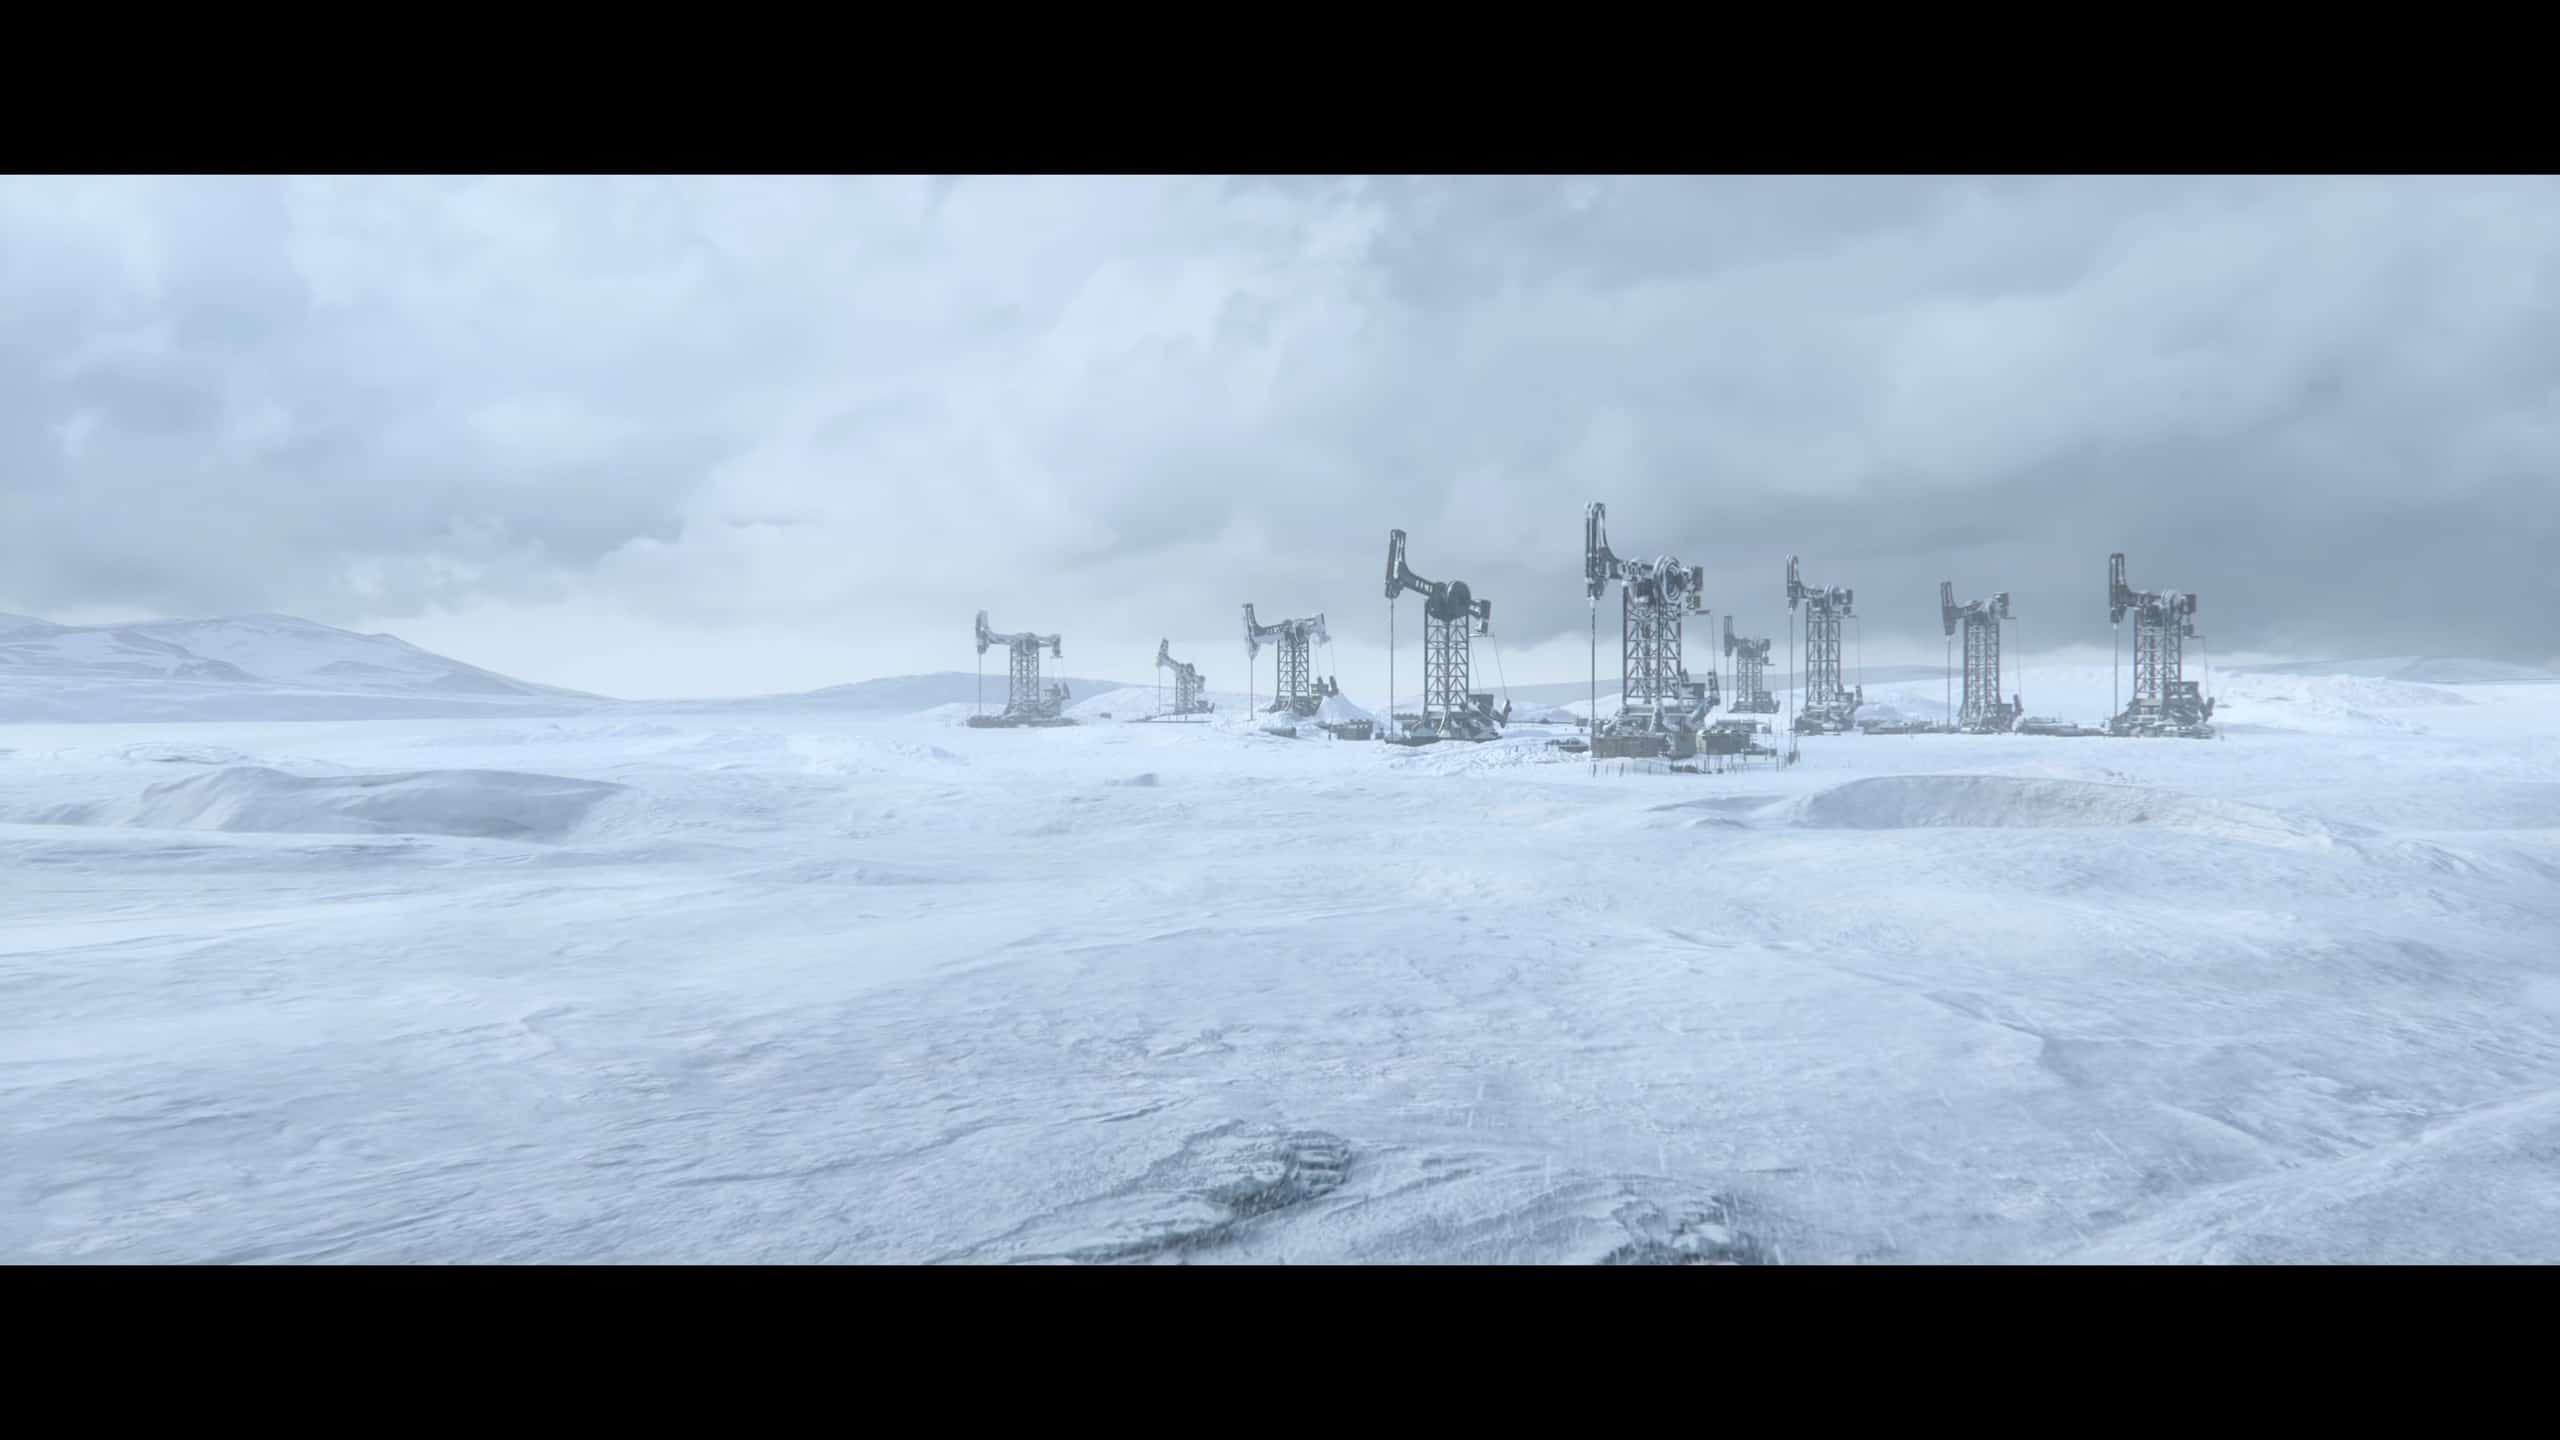 Frostpunk 2 release date: A collection of oil rigs in the middle of a frozen wasteland.